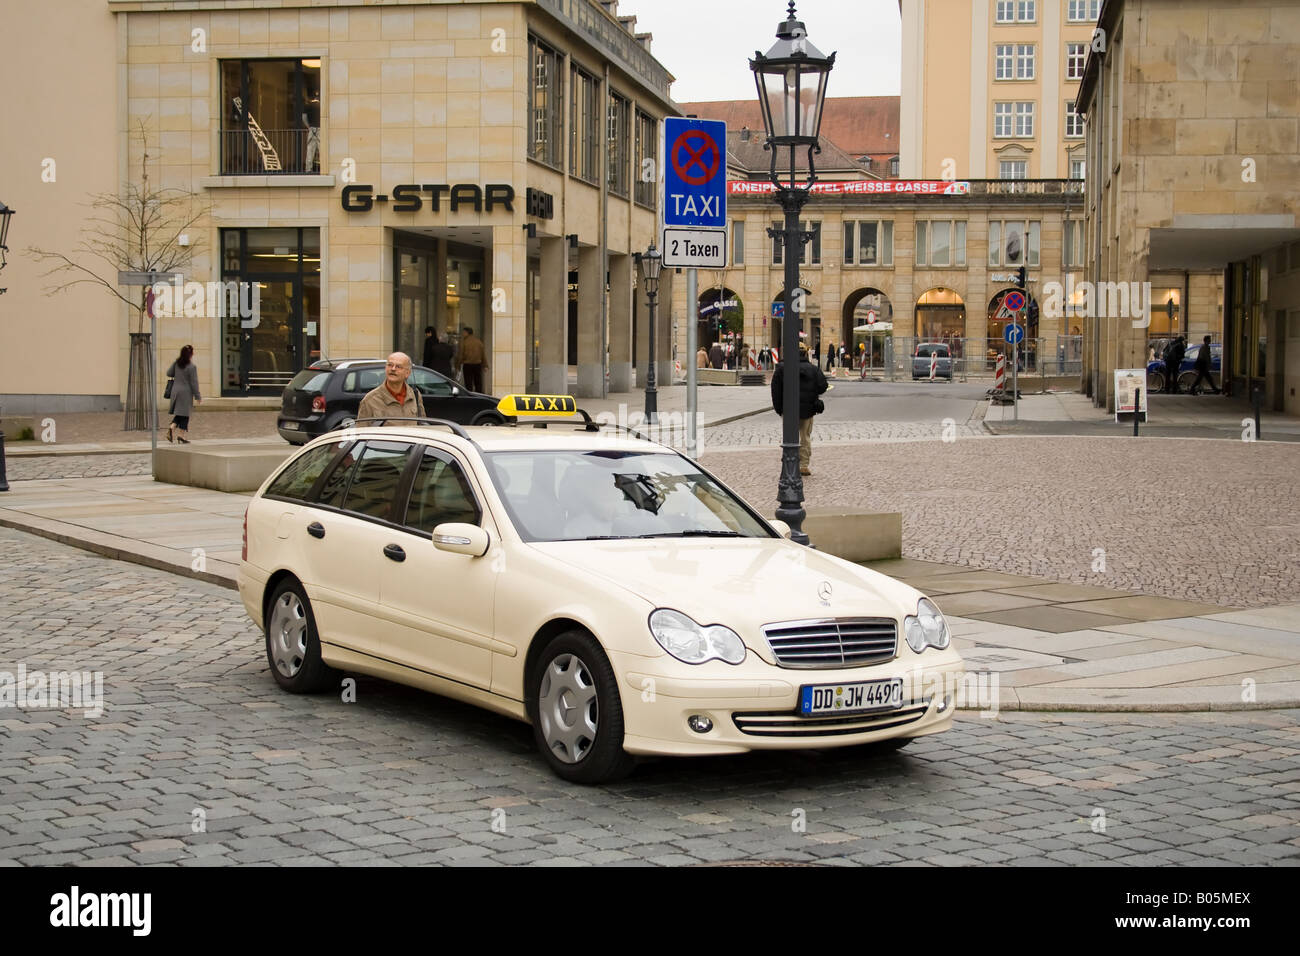 Taxi waiting by the curb on a cobblestone street in Dresden, with the G-Star store in the background and the Koenig-Johann-Denkmal visible Stock Photo